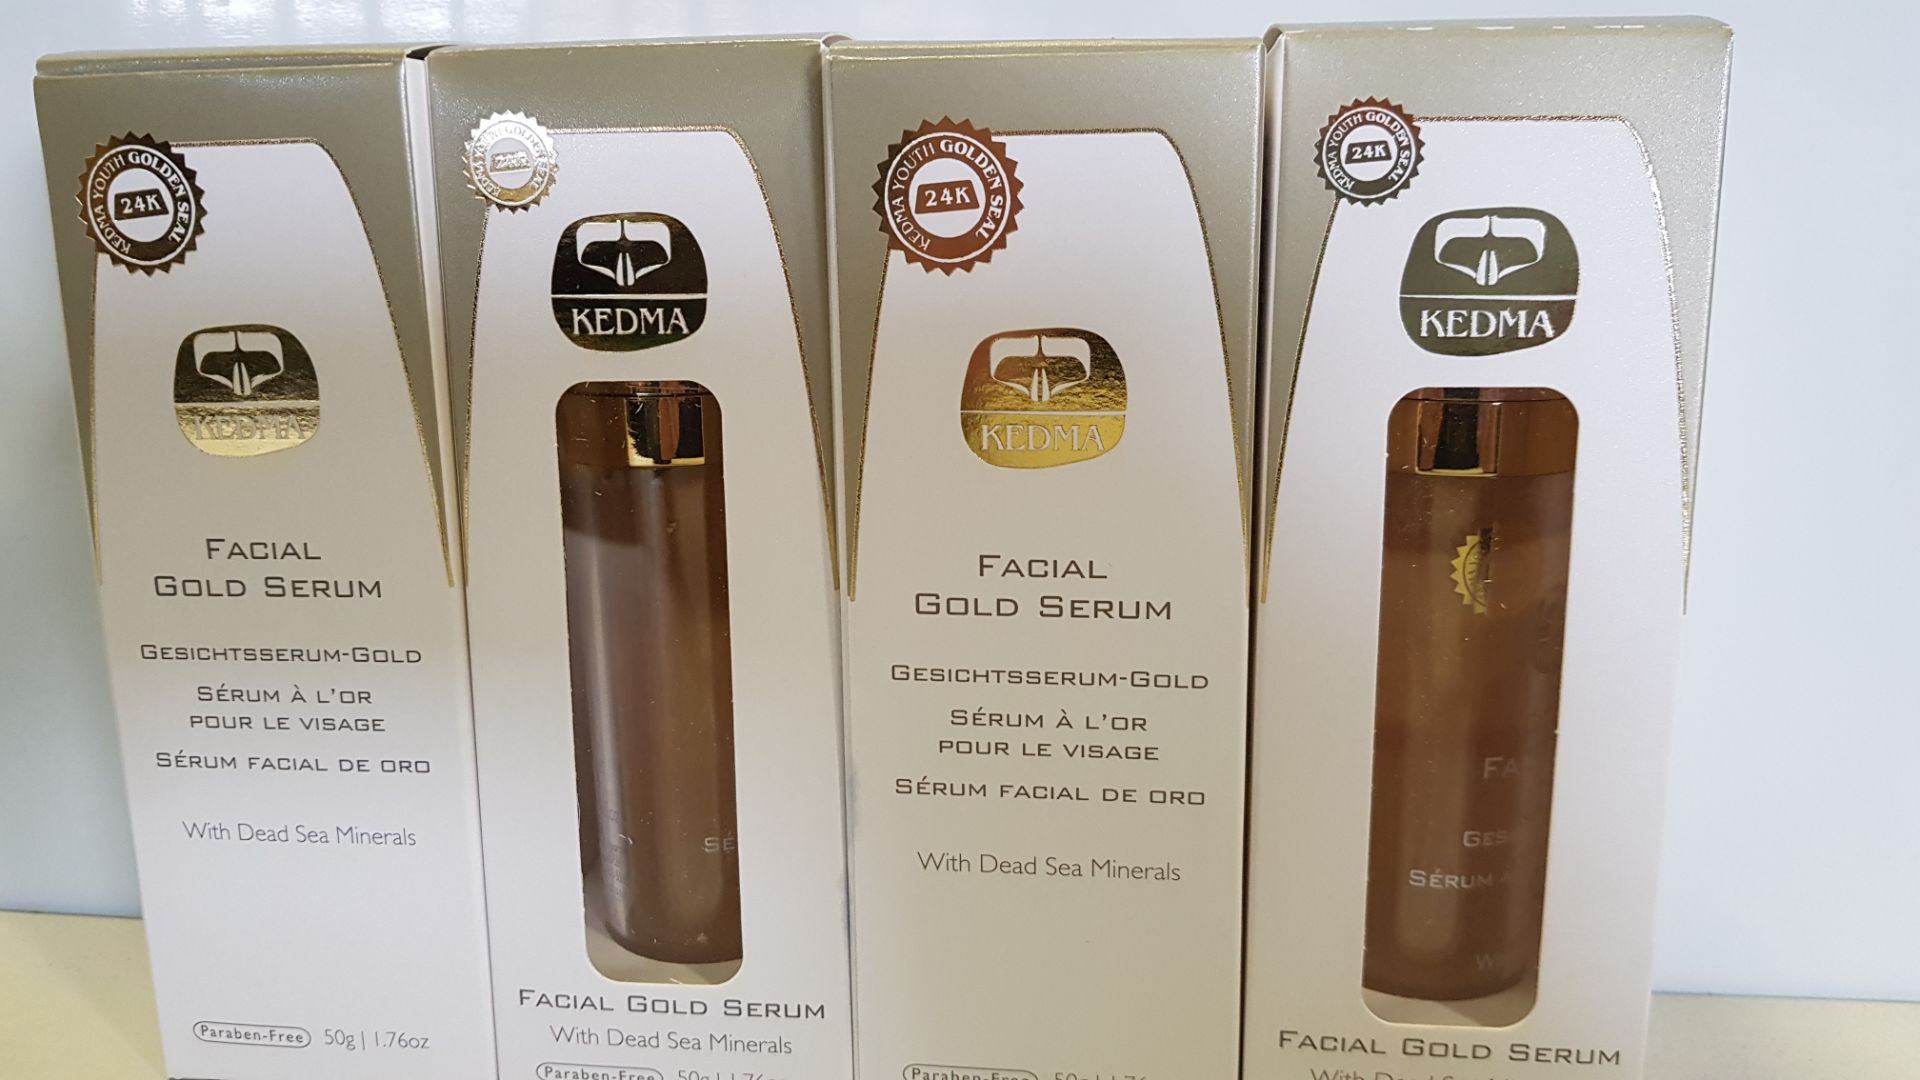 3 X BRAND NEW BOXED KEDMA 24K FACIAL GOLD SERUM WITH DEAD SEA MINERALS (50G) TOTAL RRP $2,969.85